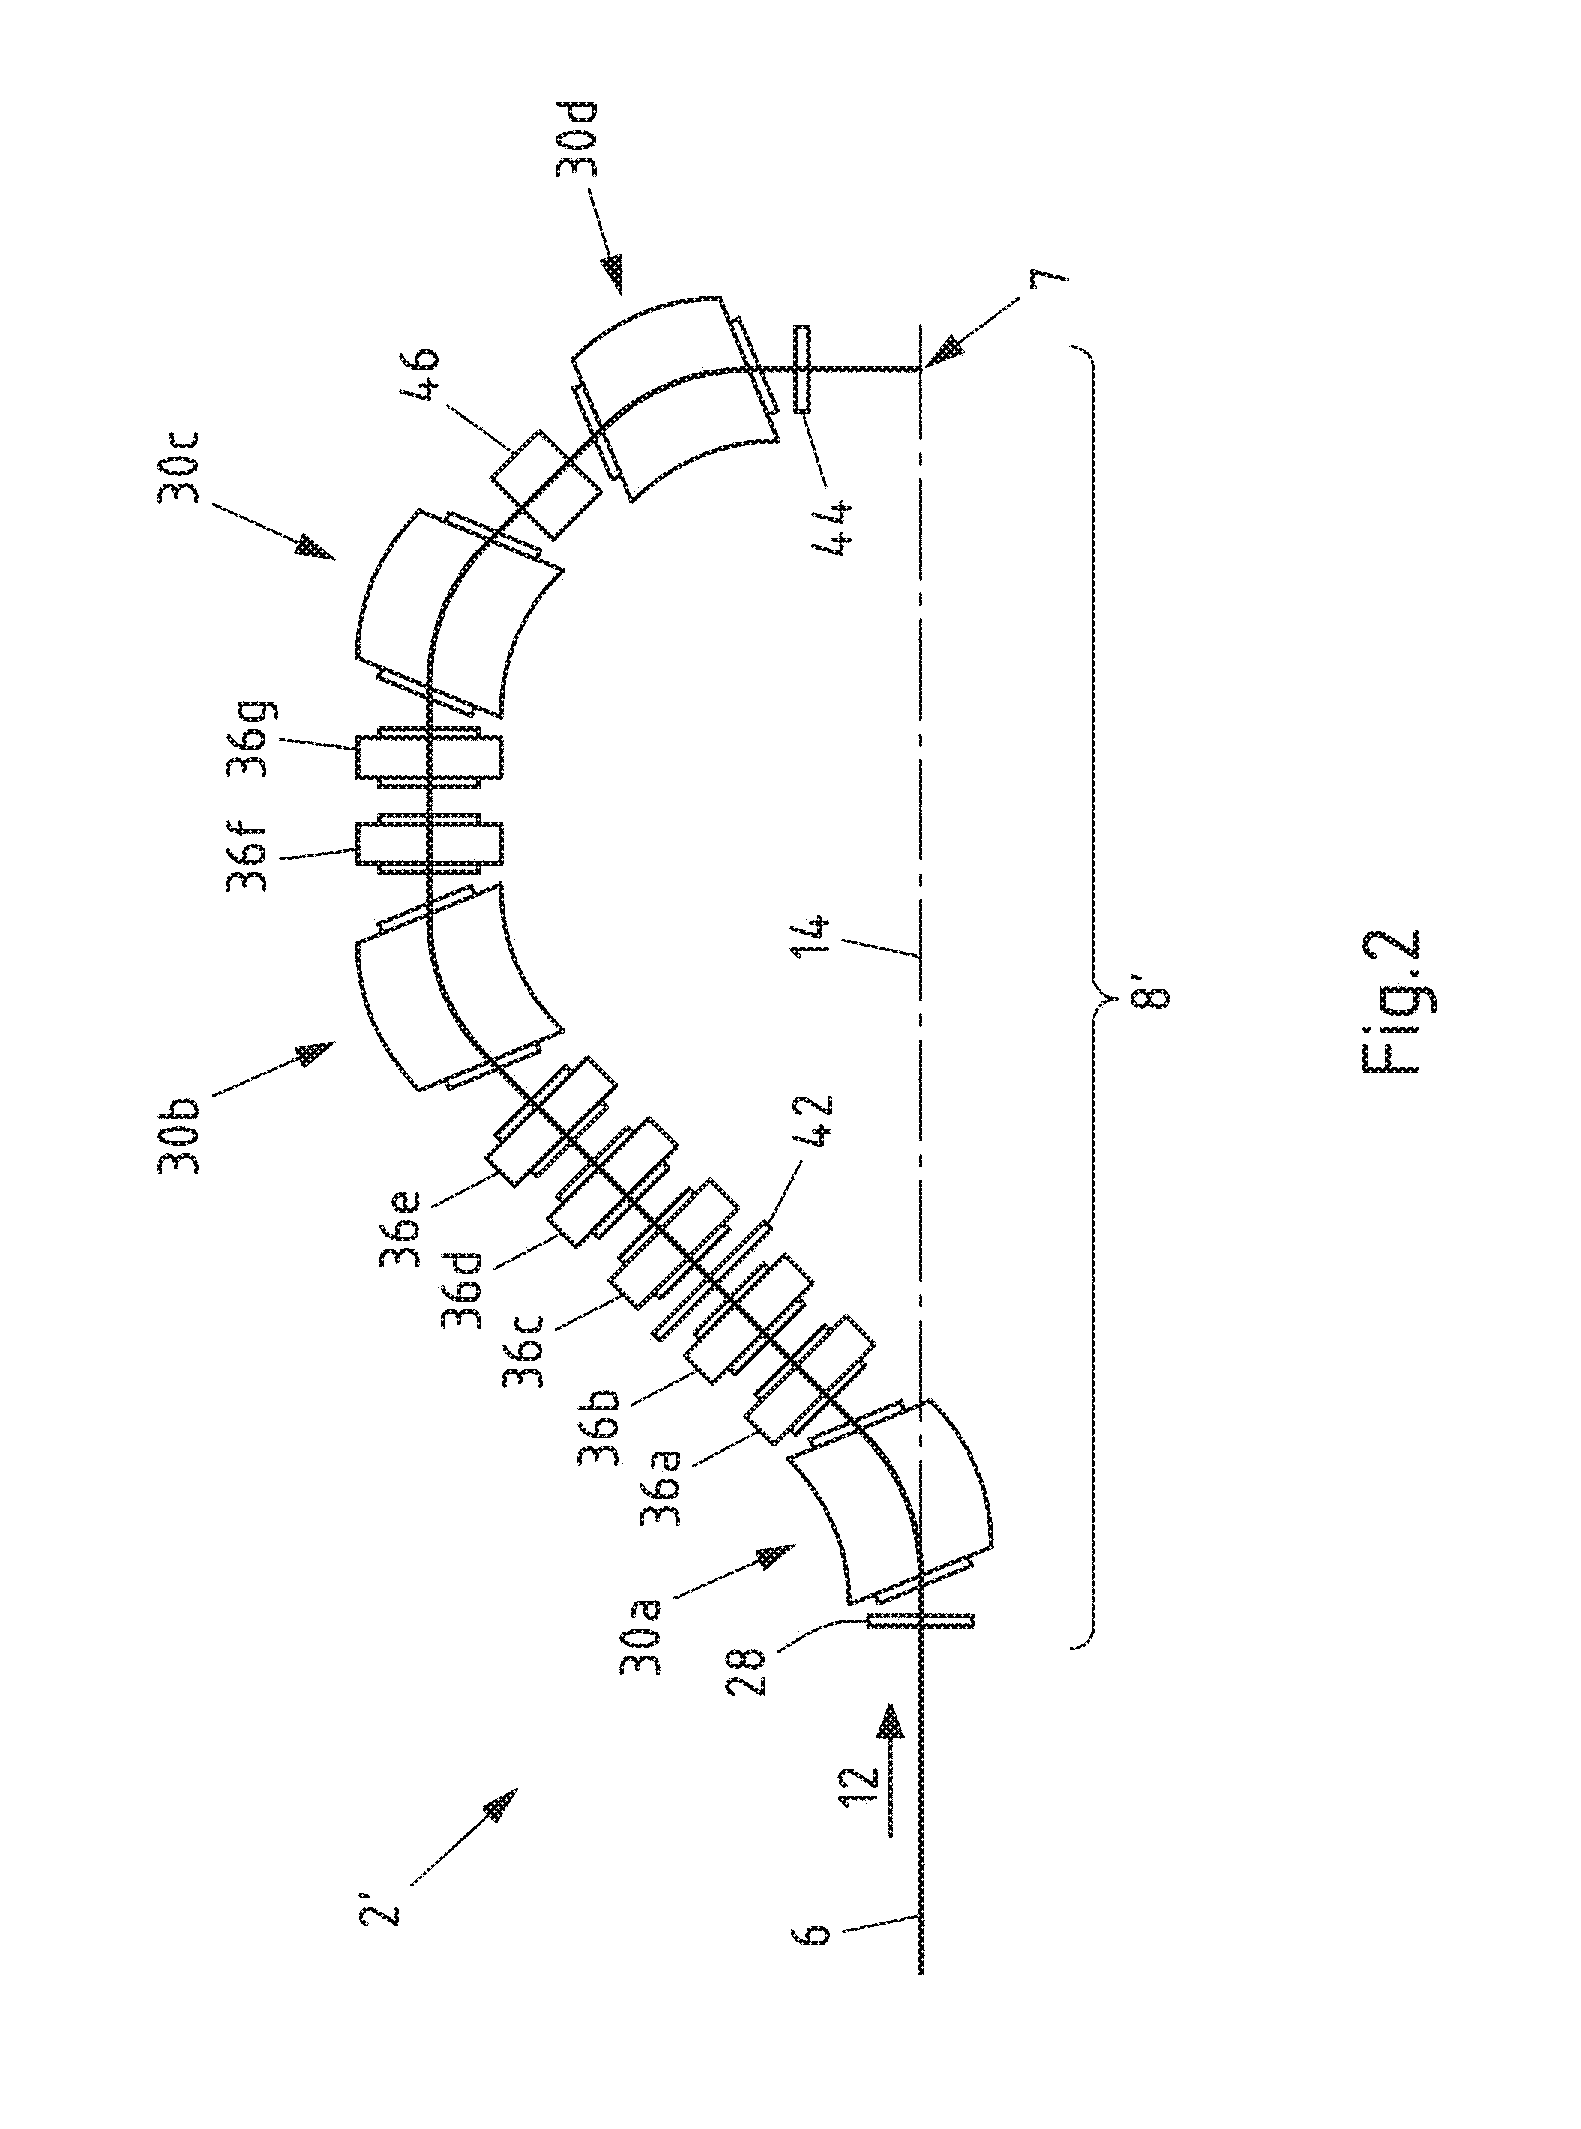 Particle beam treatment system with solenoid magnets